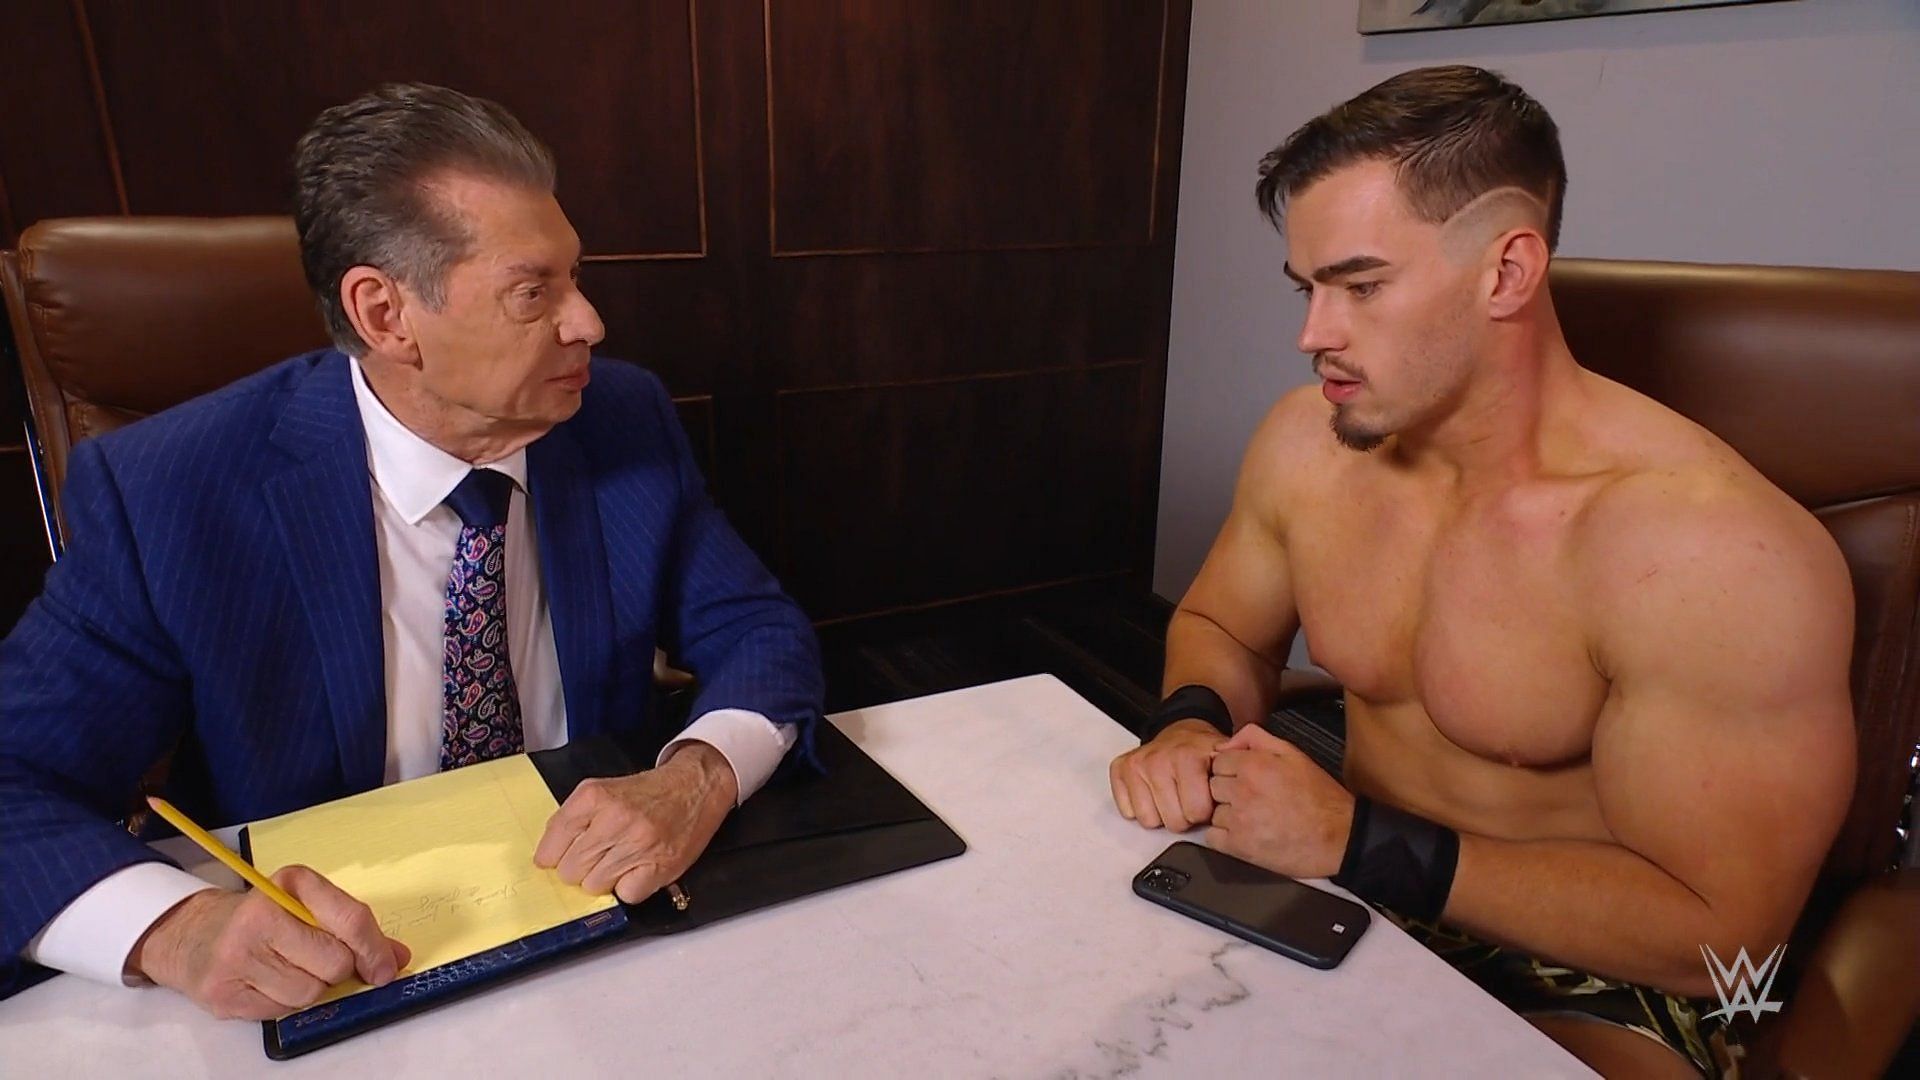 Will Vince McMahon help his protege yet again?